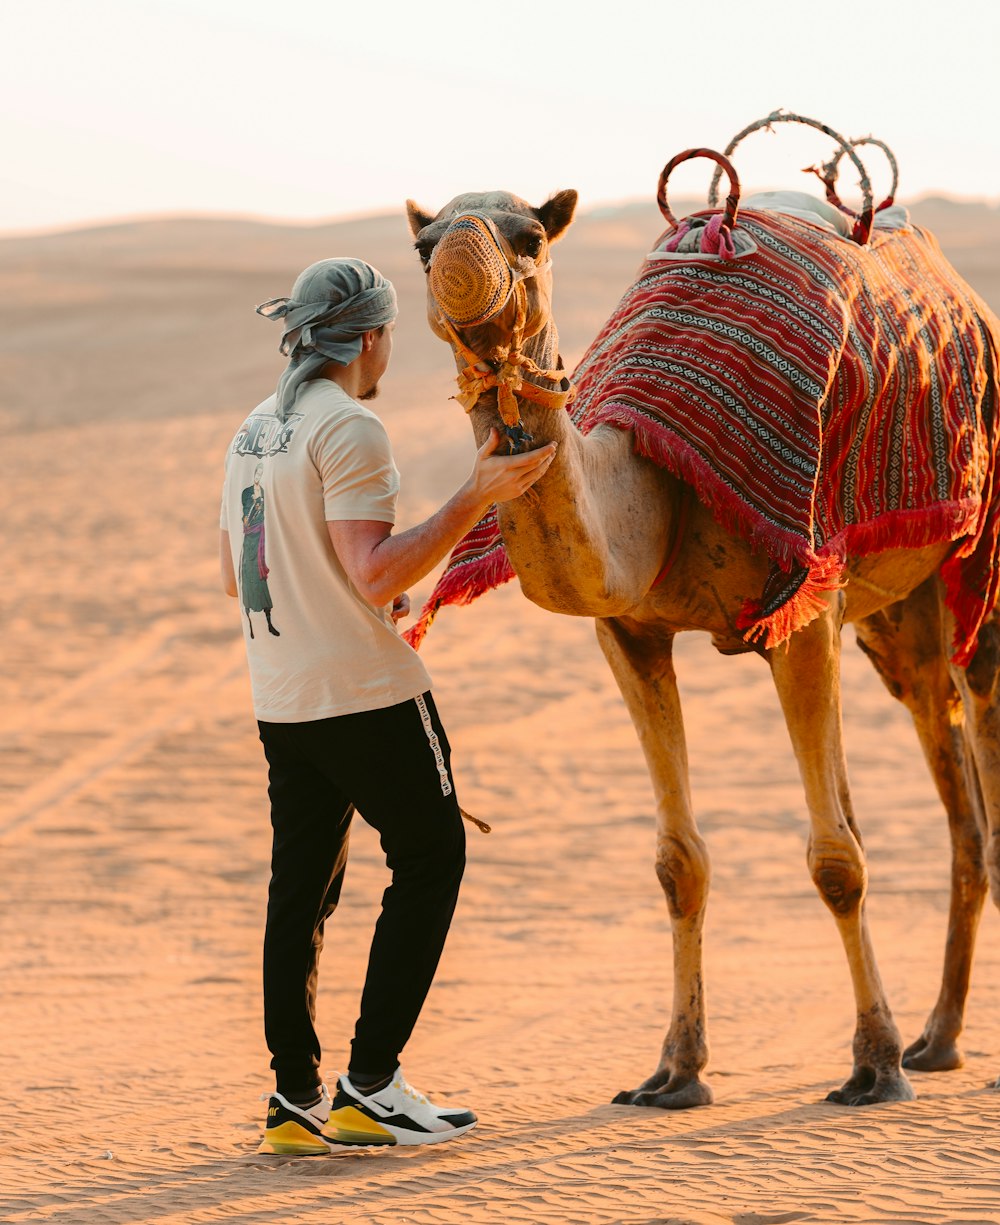 a man standing next to a camel in the desert